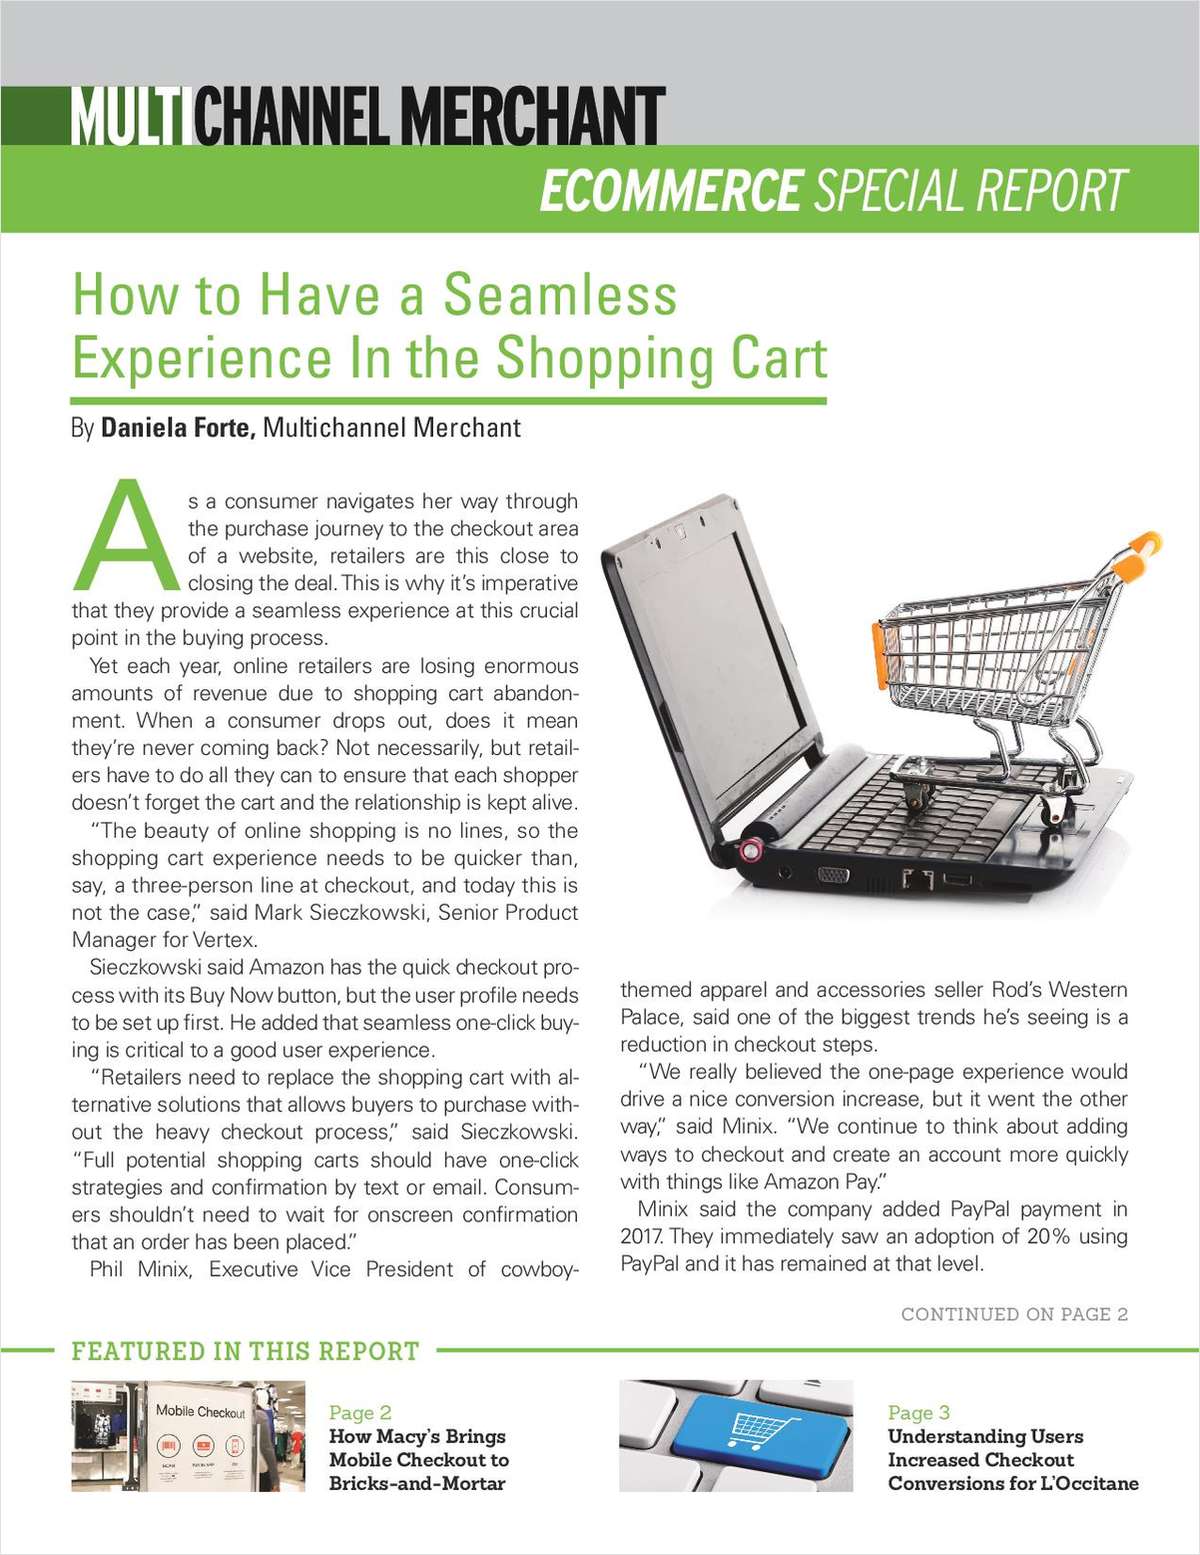 How to Close the Deal in the Shopping Cart